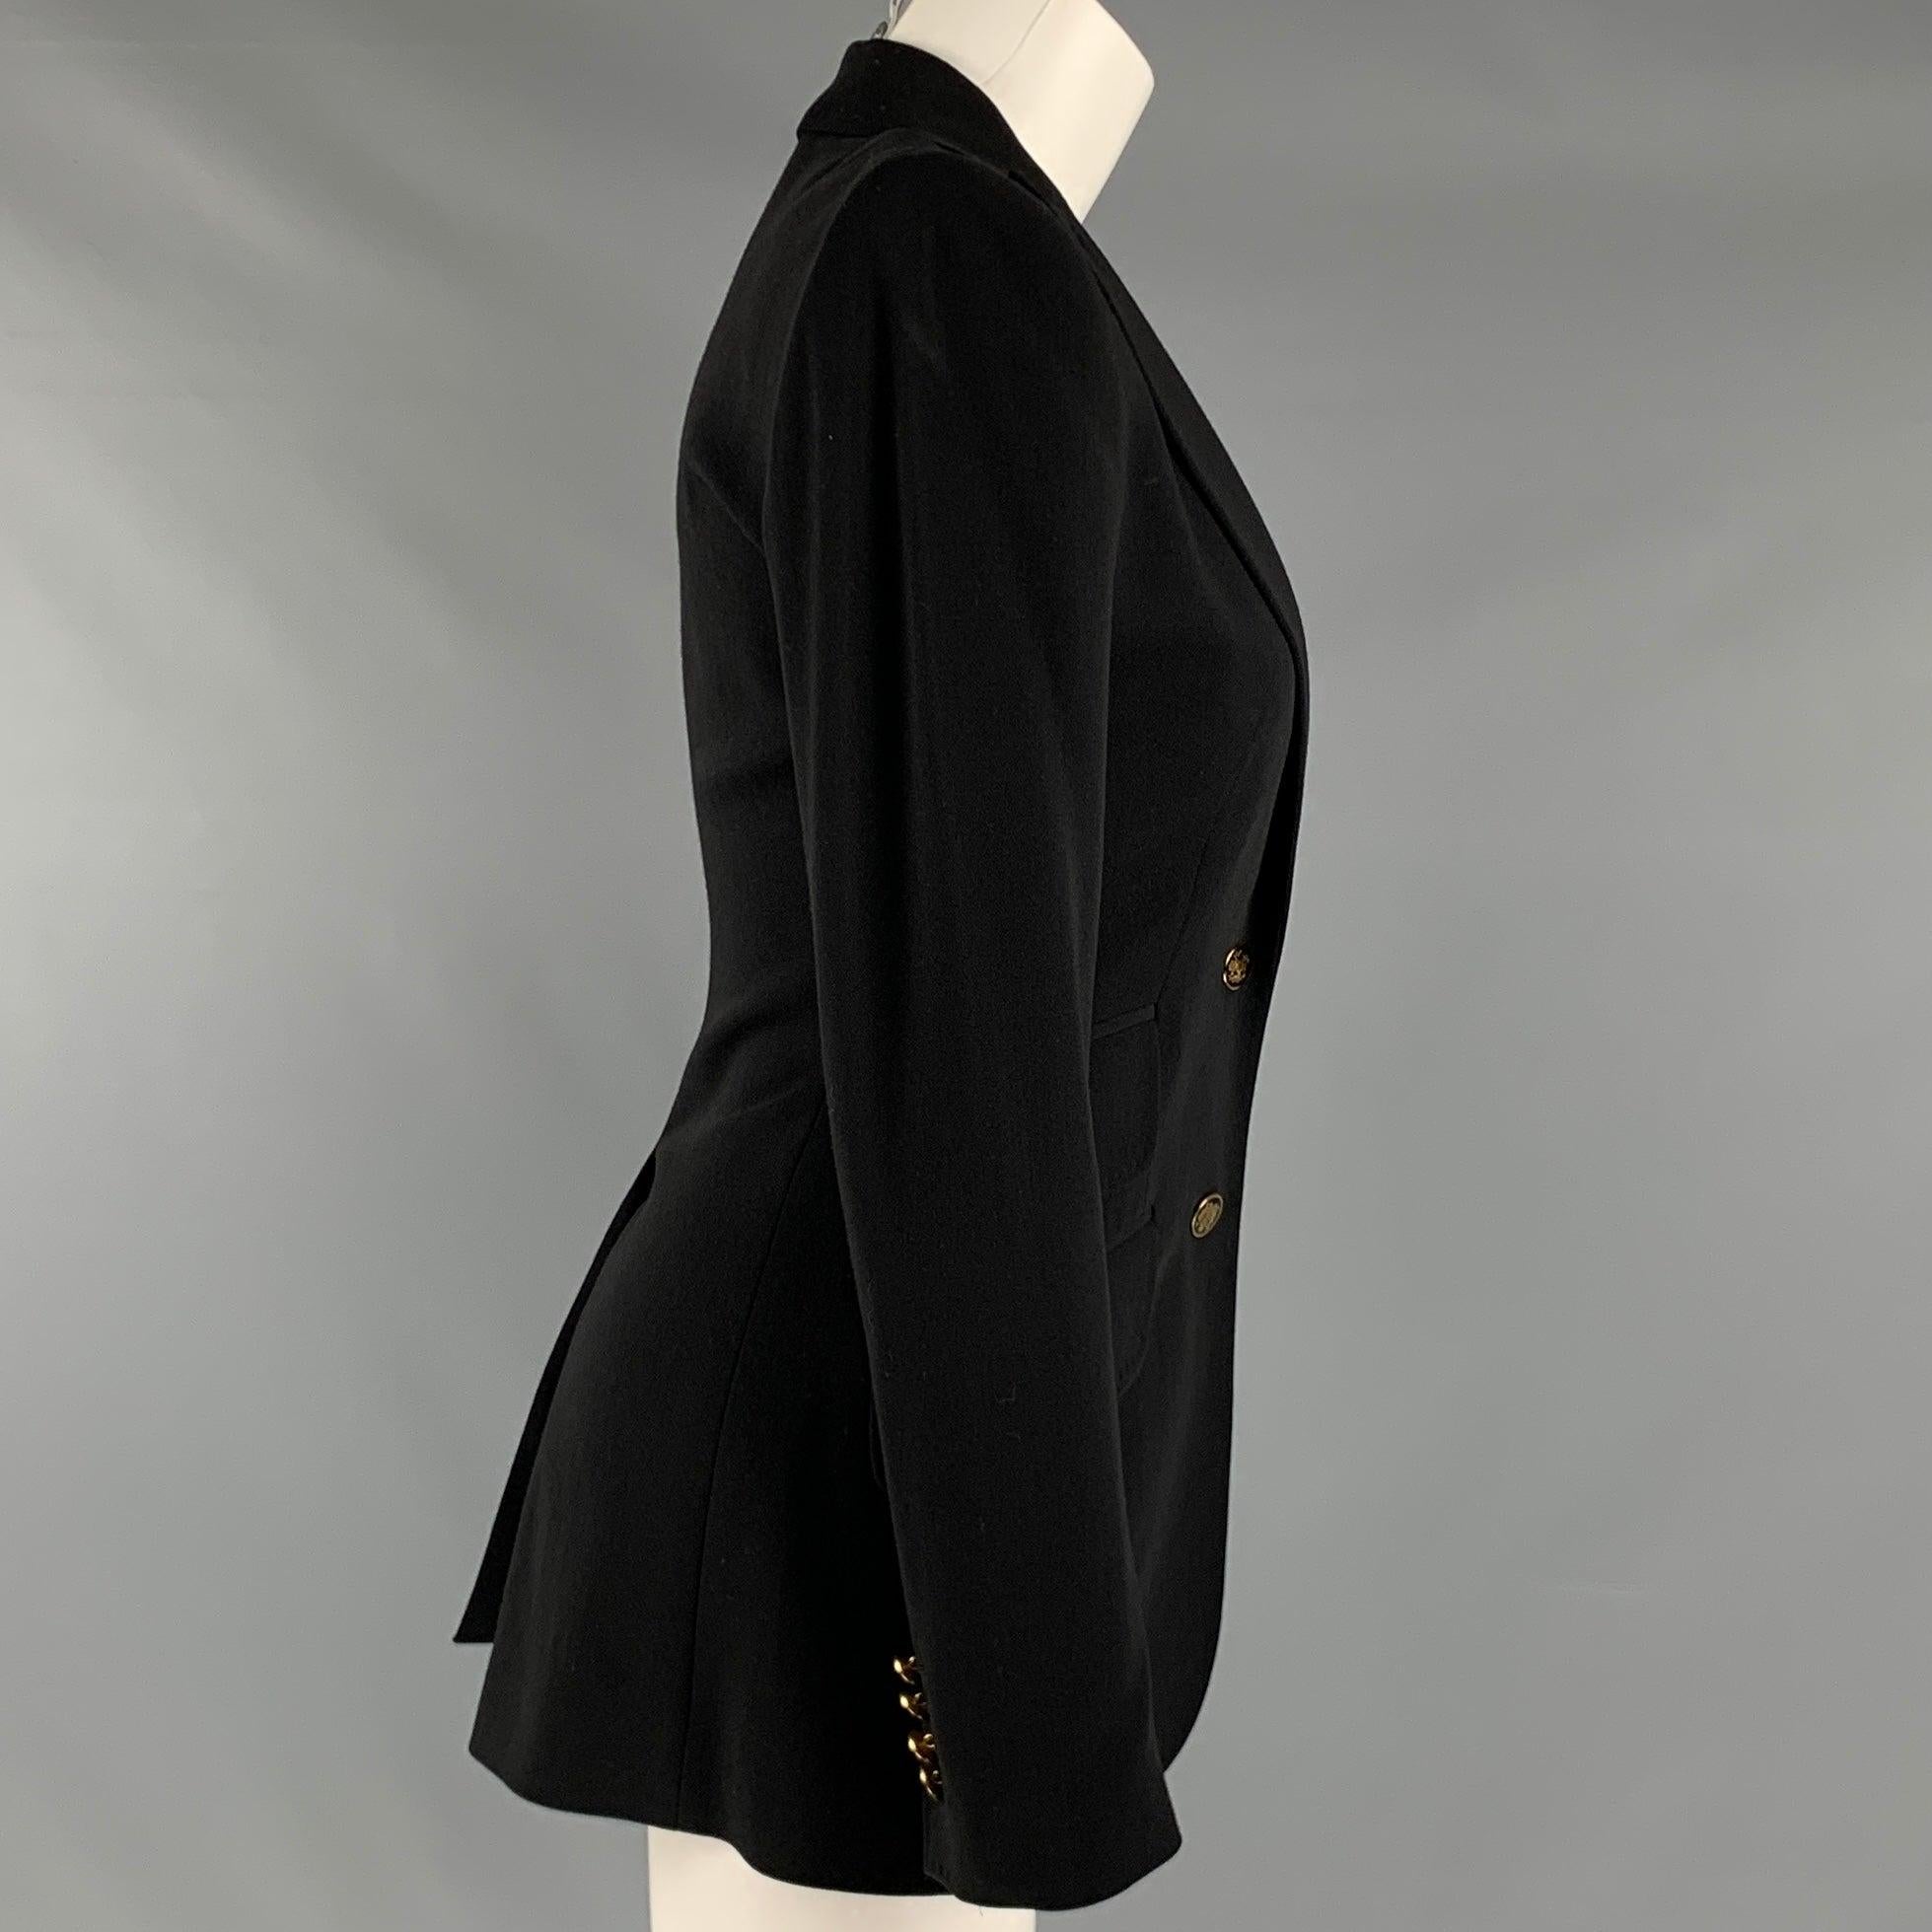 DOLCE & GABBANA Size 2 Black Wool Blend Single breasted Blazer In Excellent Condition For Sale In San Francisco, CA